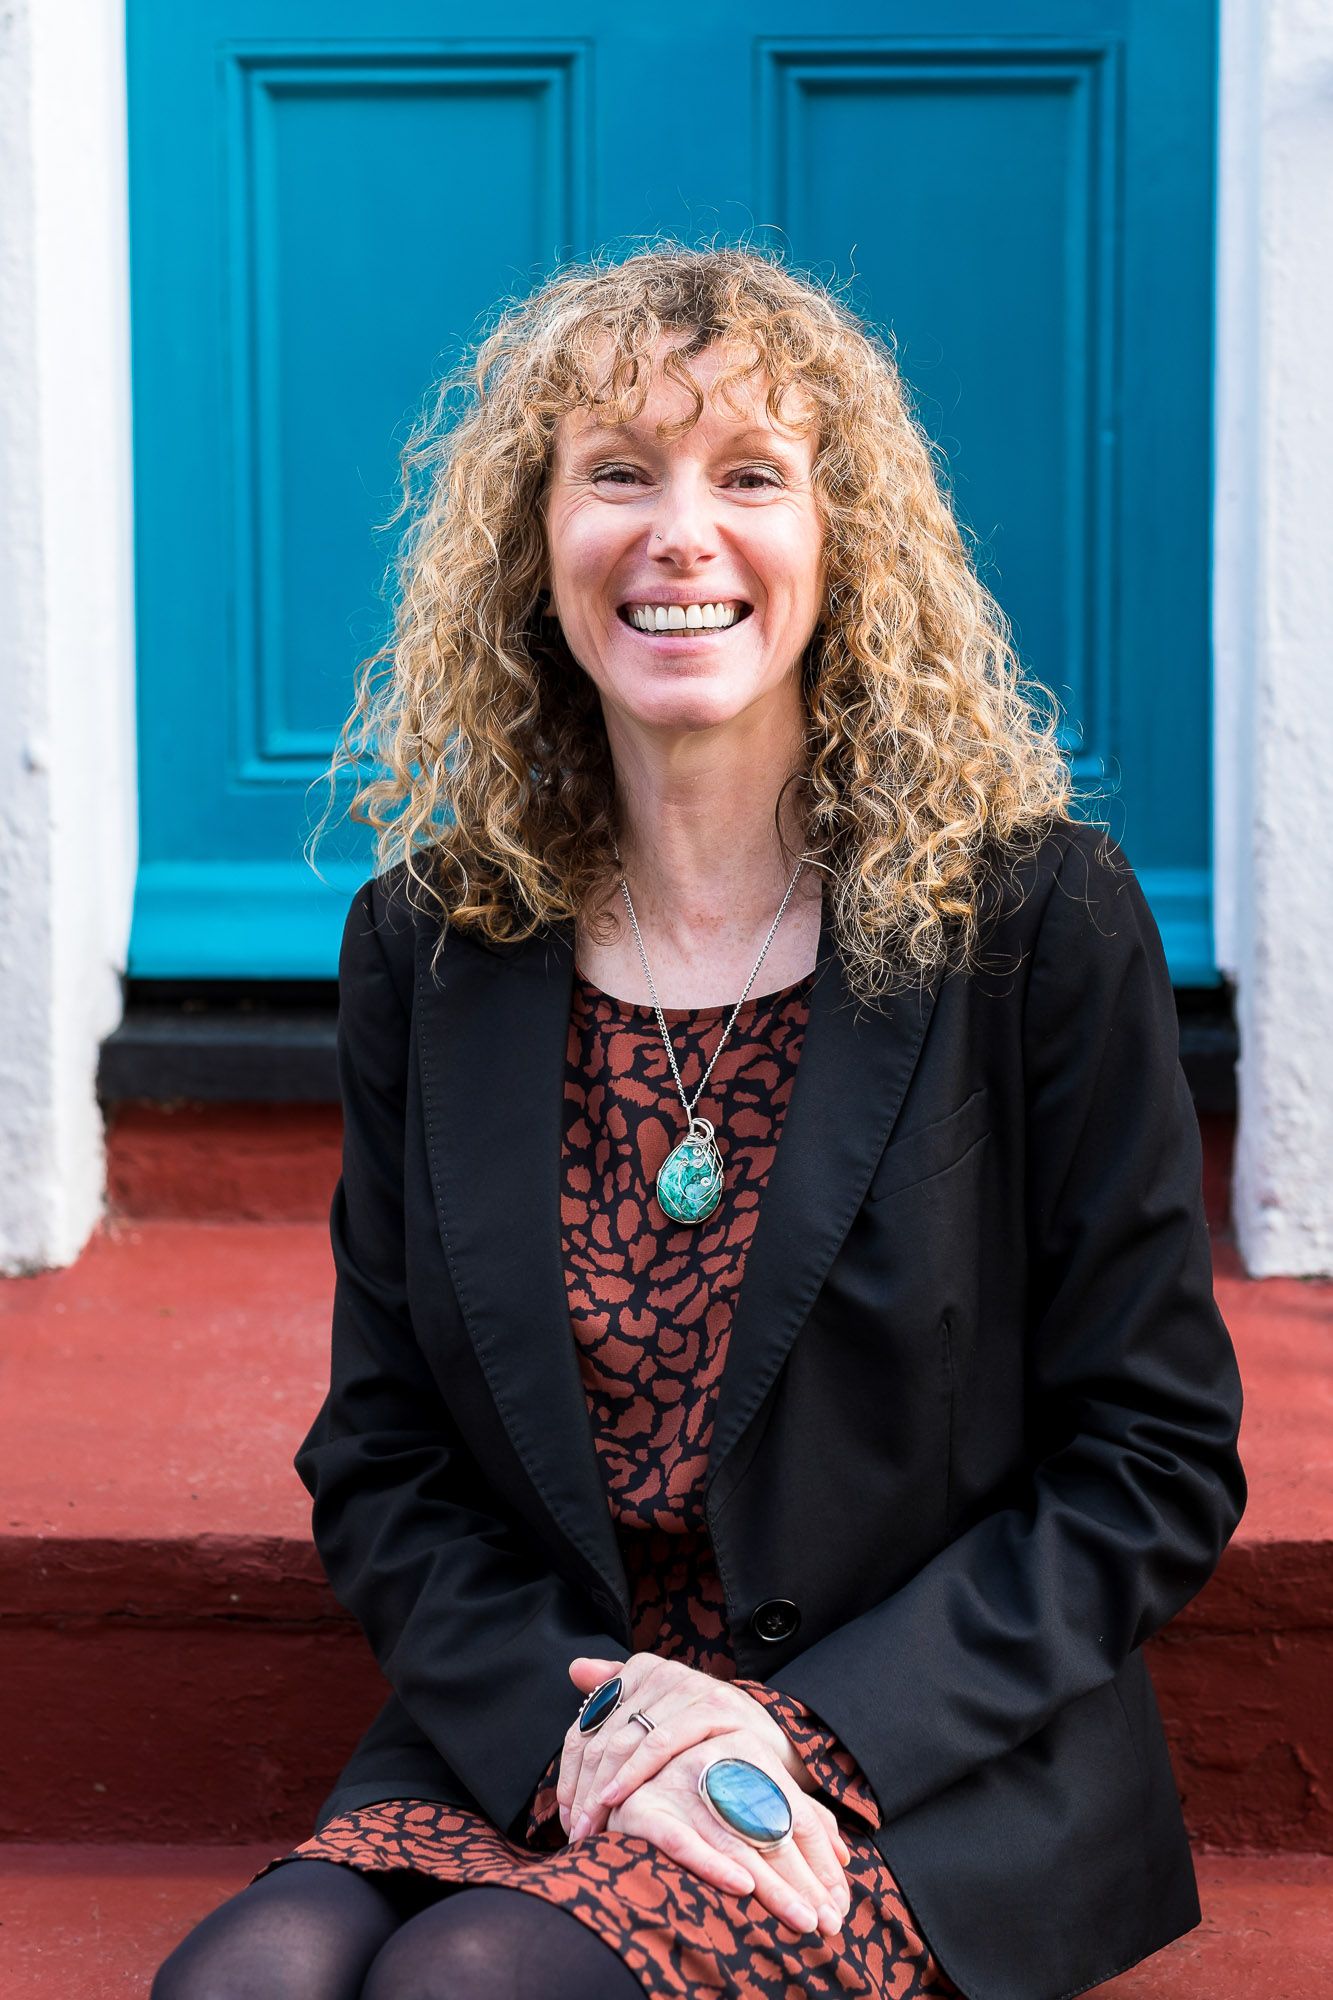 Leadership coach Jo Murfin sitting on a step in the street in Brighton in front of a blue door